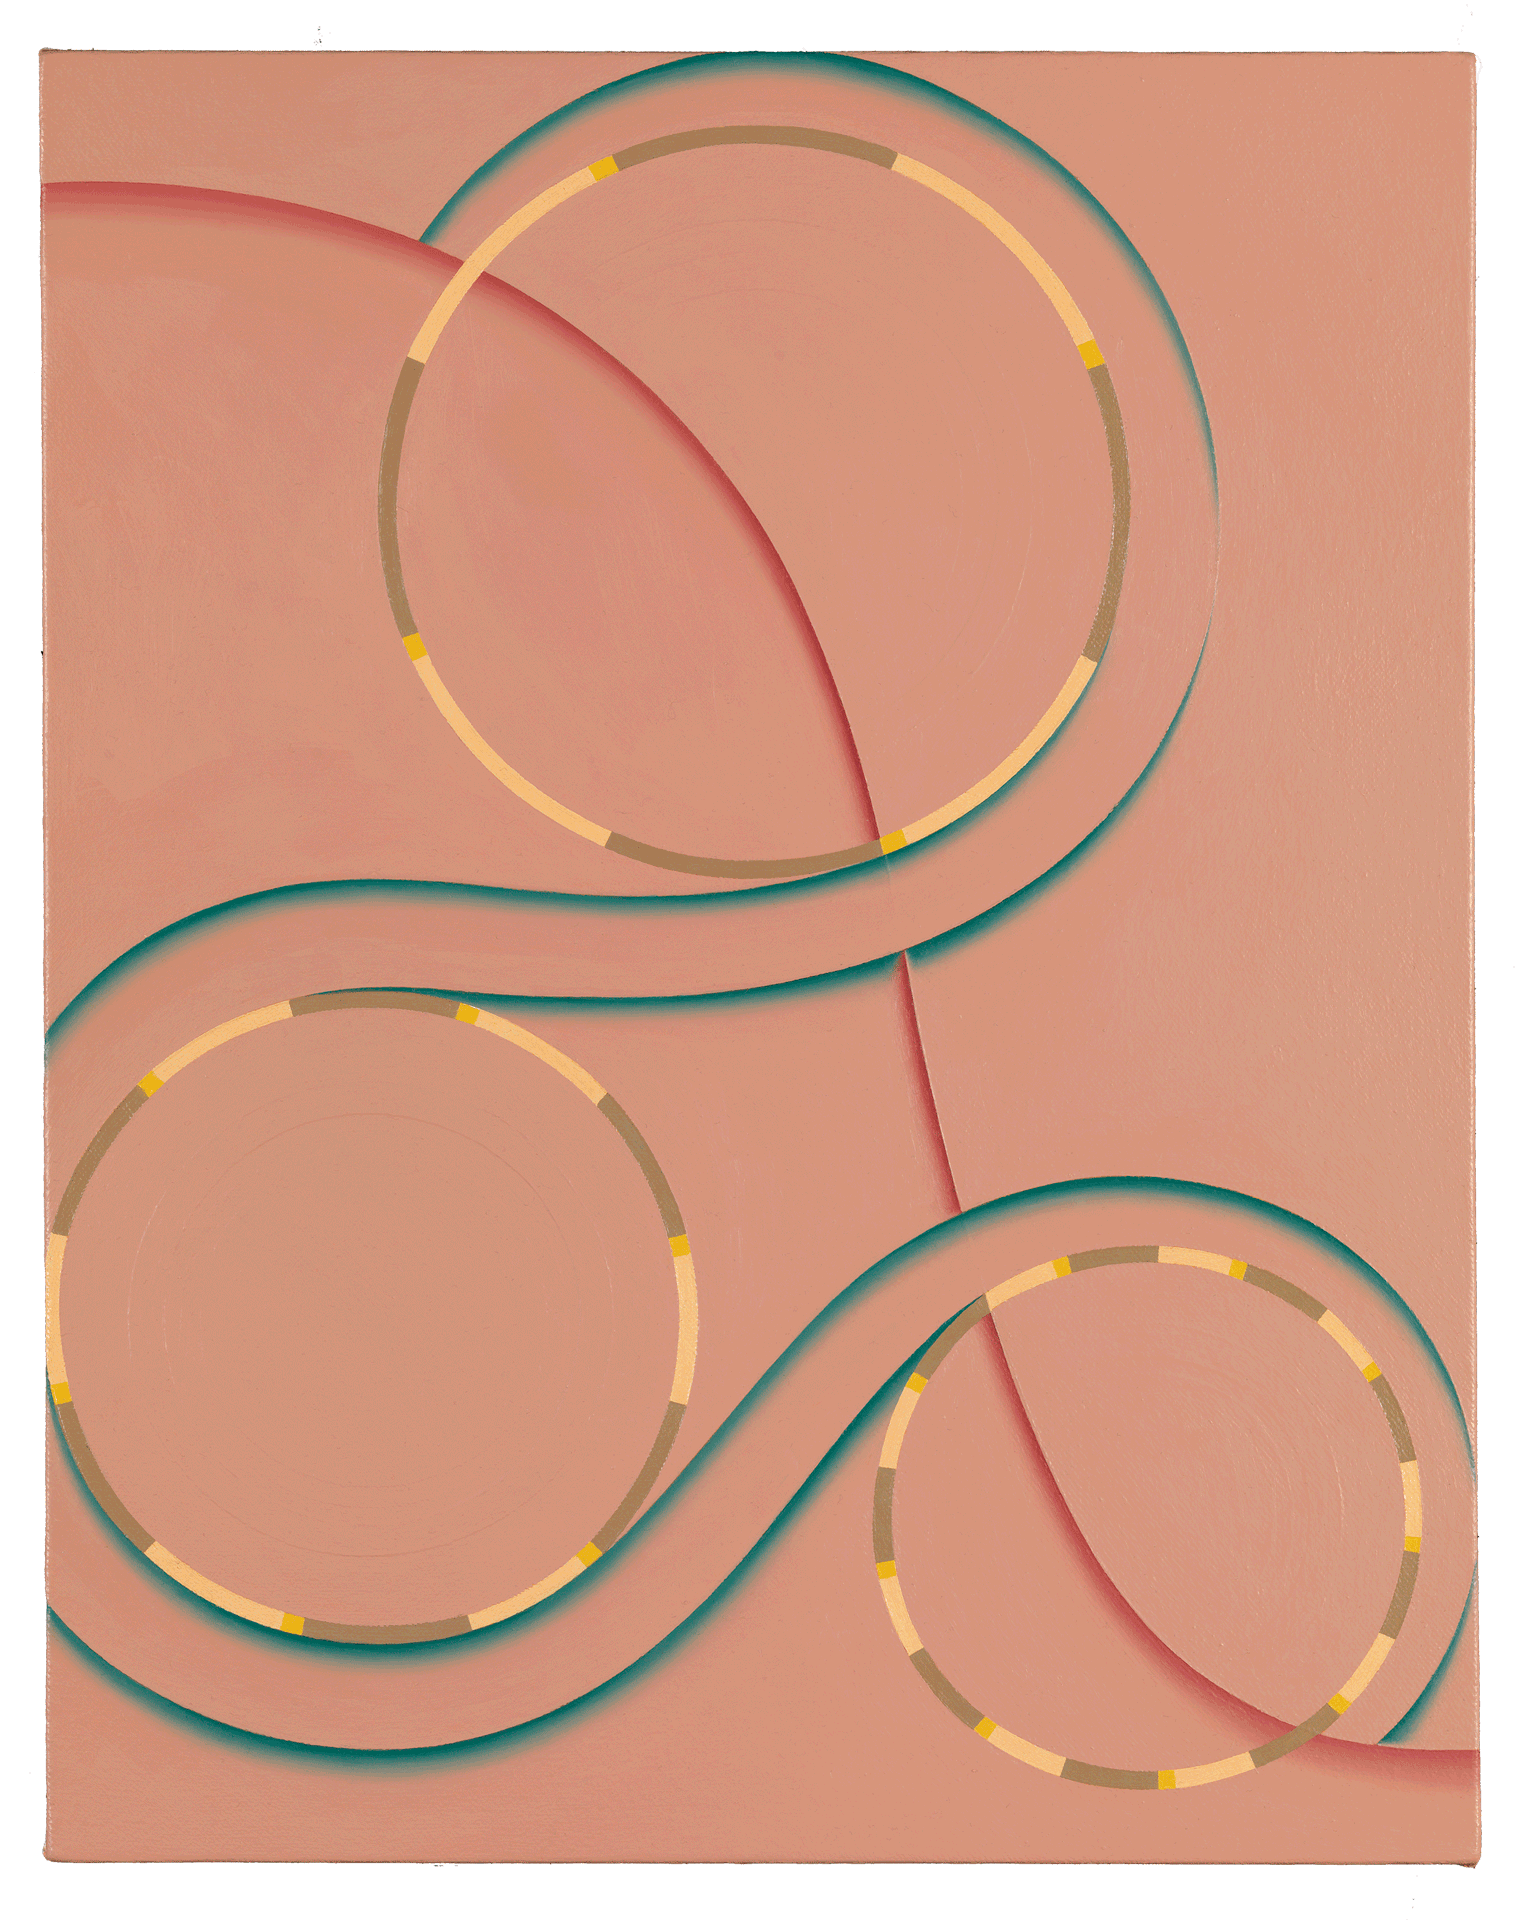 A painting by Tomma Abts, titled Isko, dated 2008. 